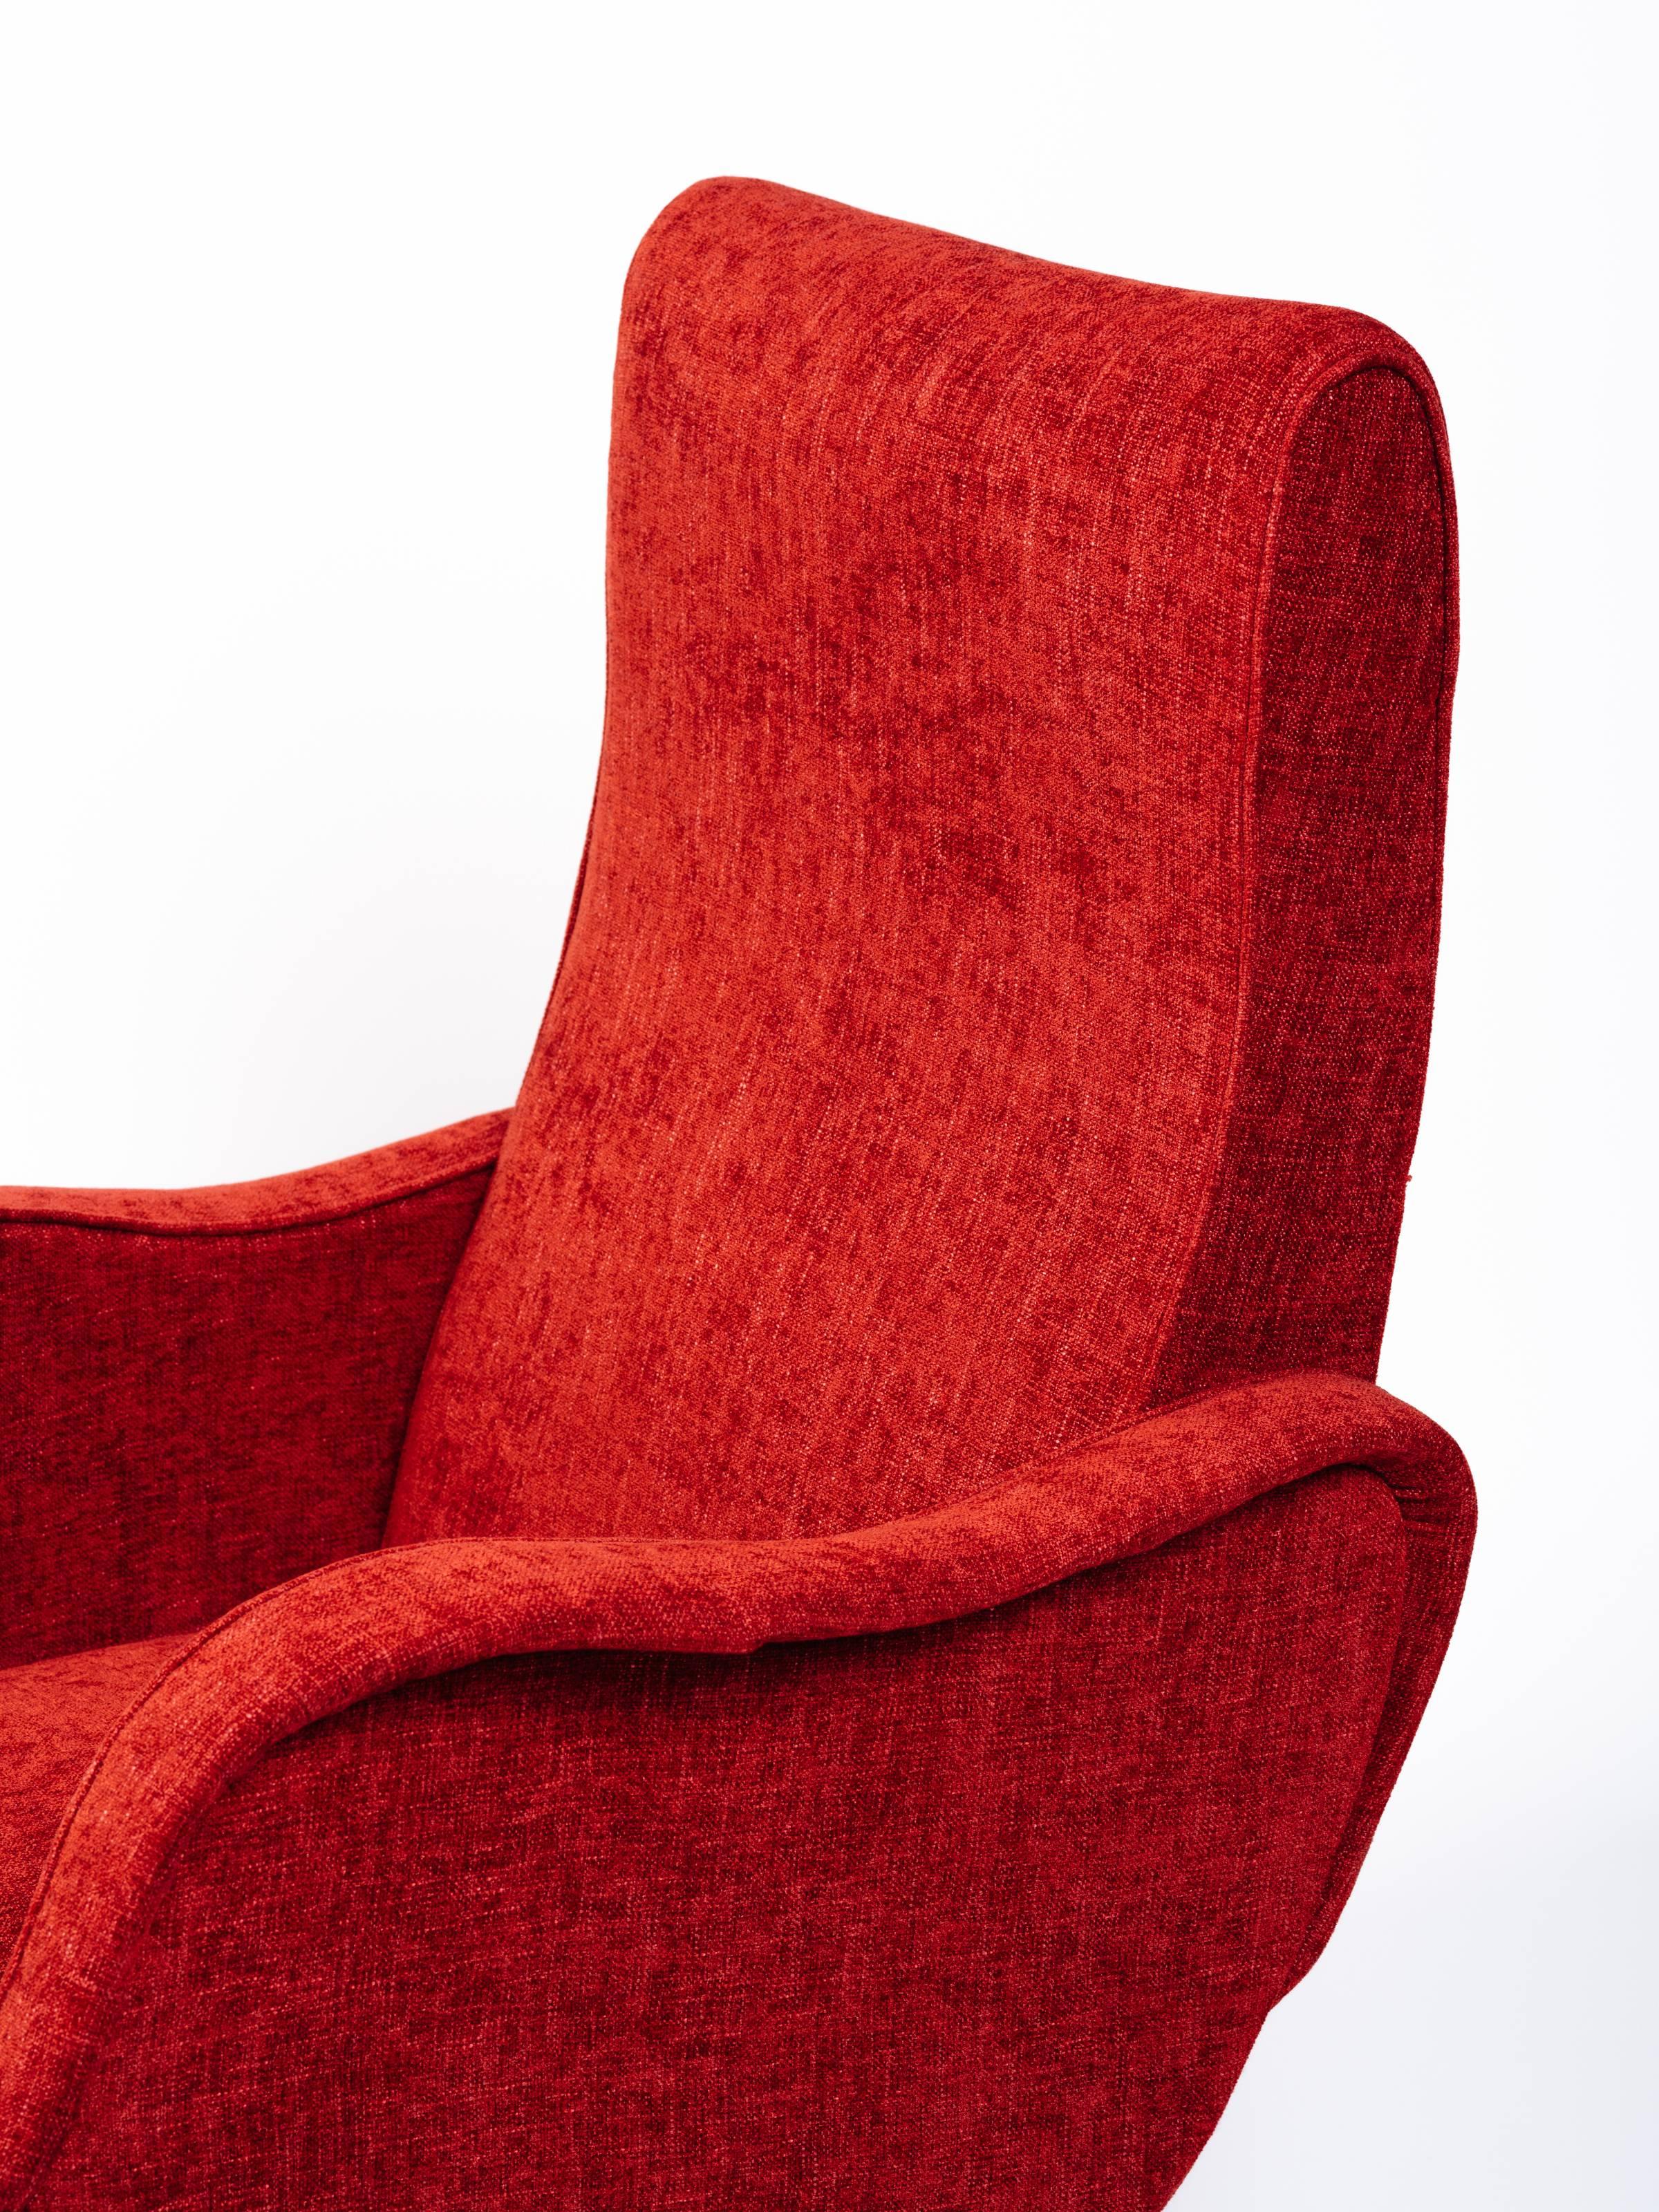 Mid-20th Century Italian Mid-Century Modern Lounge Chair in Vibrant Woven Red